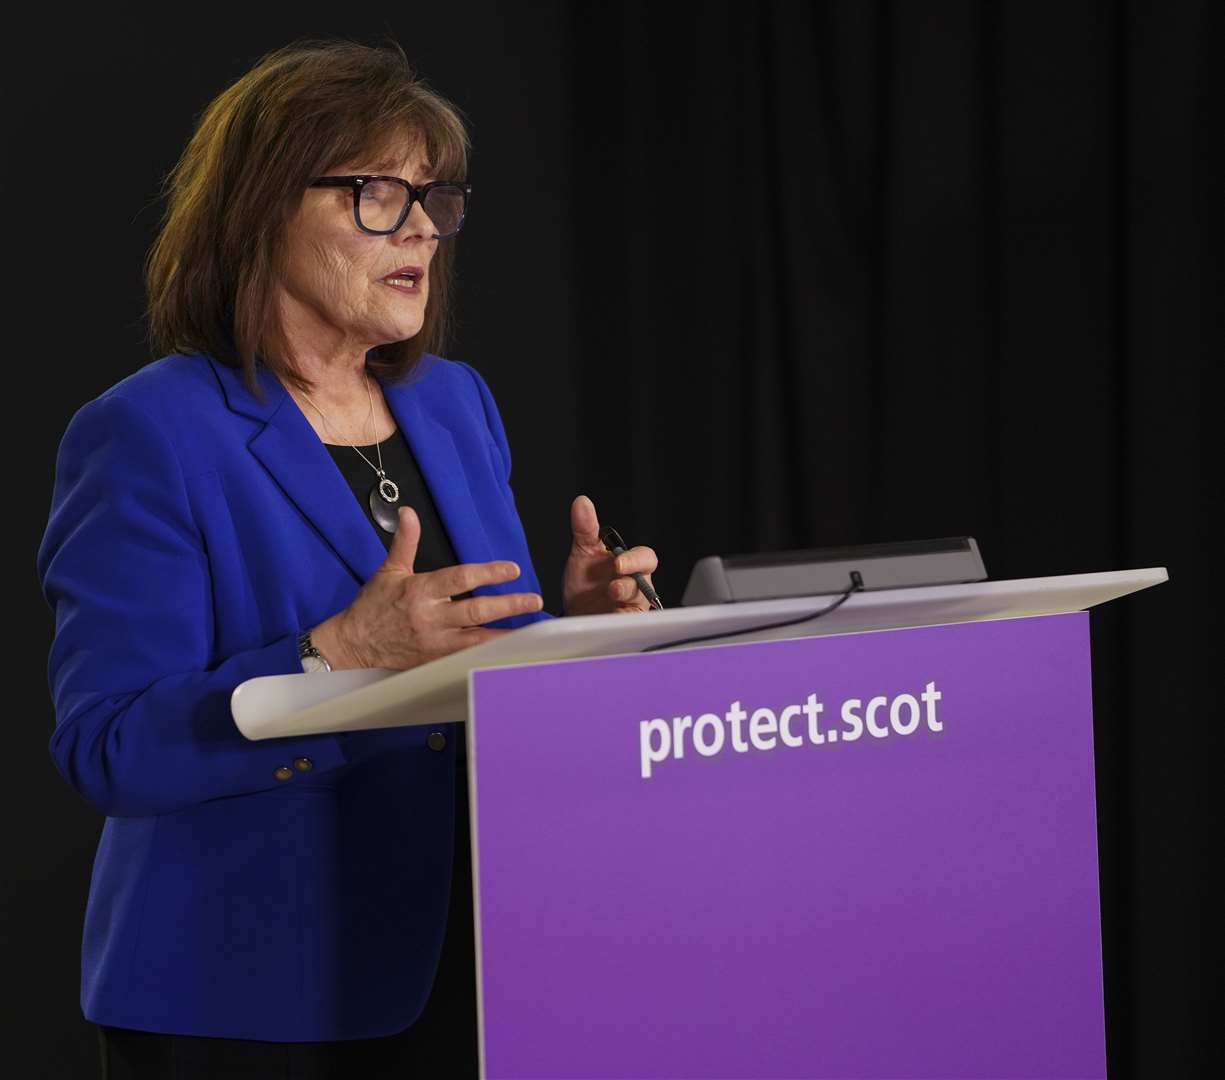 Jeane Freeman said the Scottish Government would continue to work with the UK government and local partners to improve access to testing in remote and rural areas.